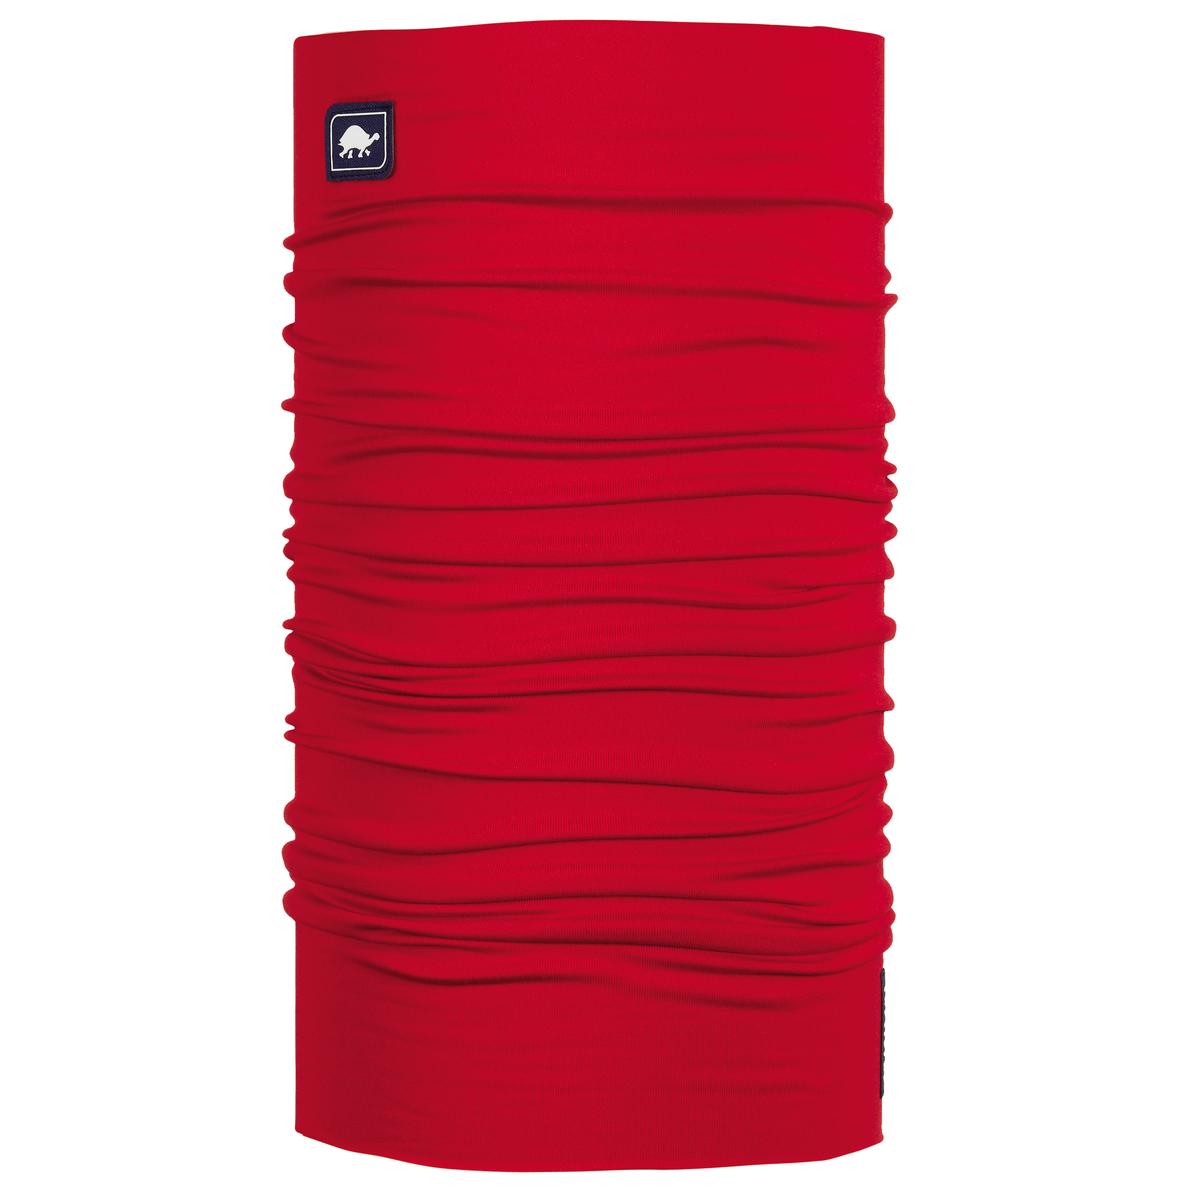 Comfort Shell Totally Tubular, Solids / Color-Red